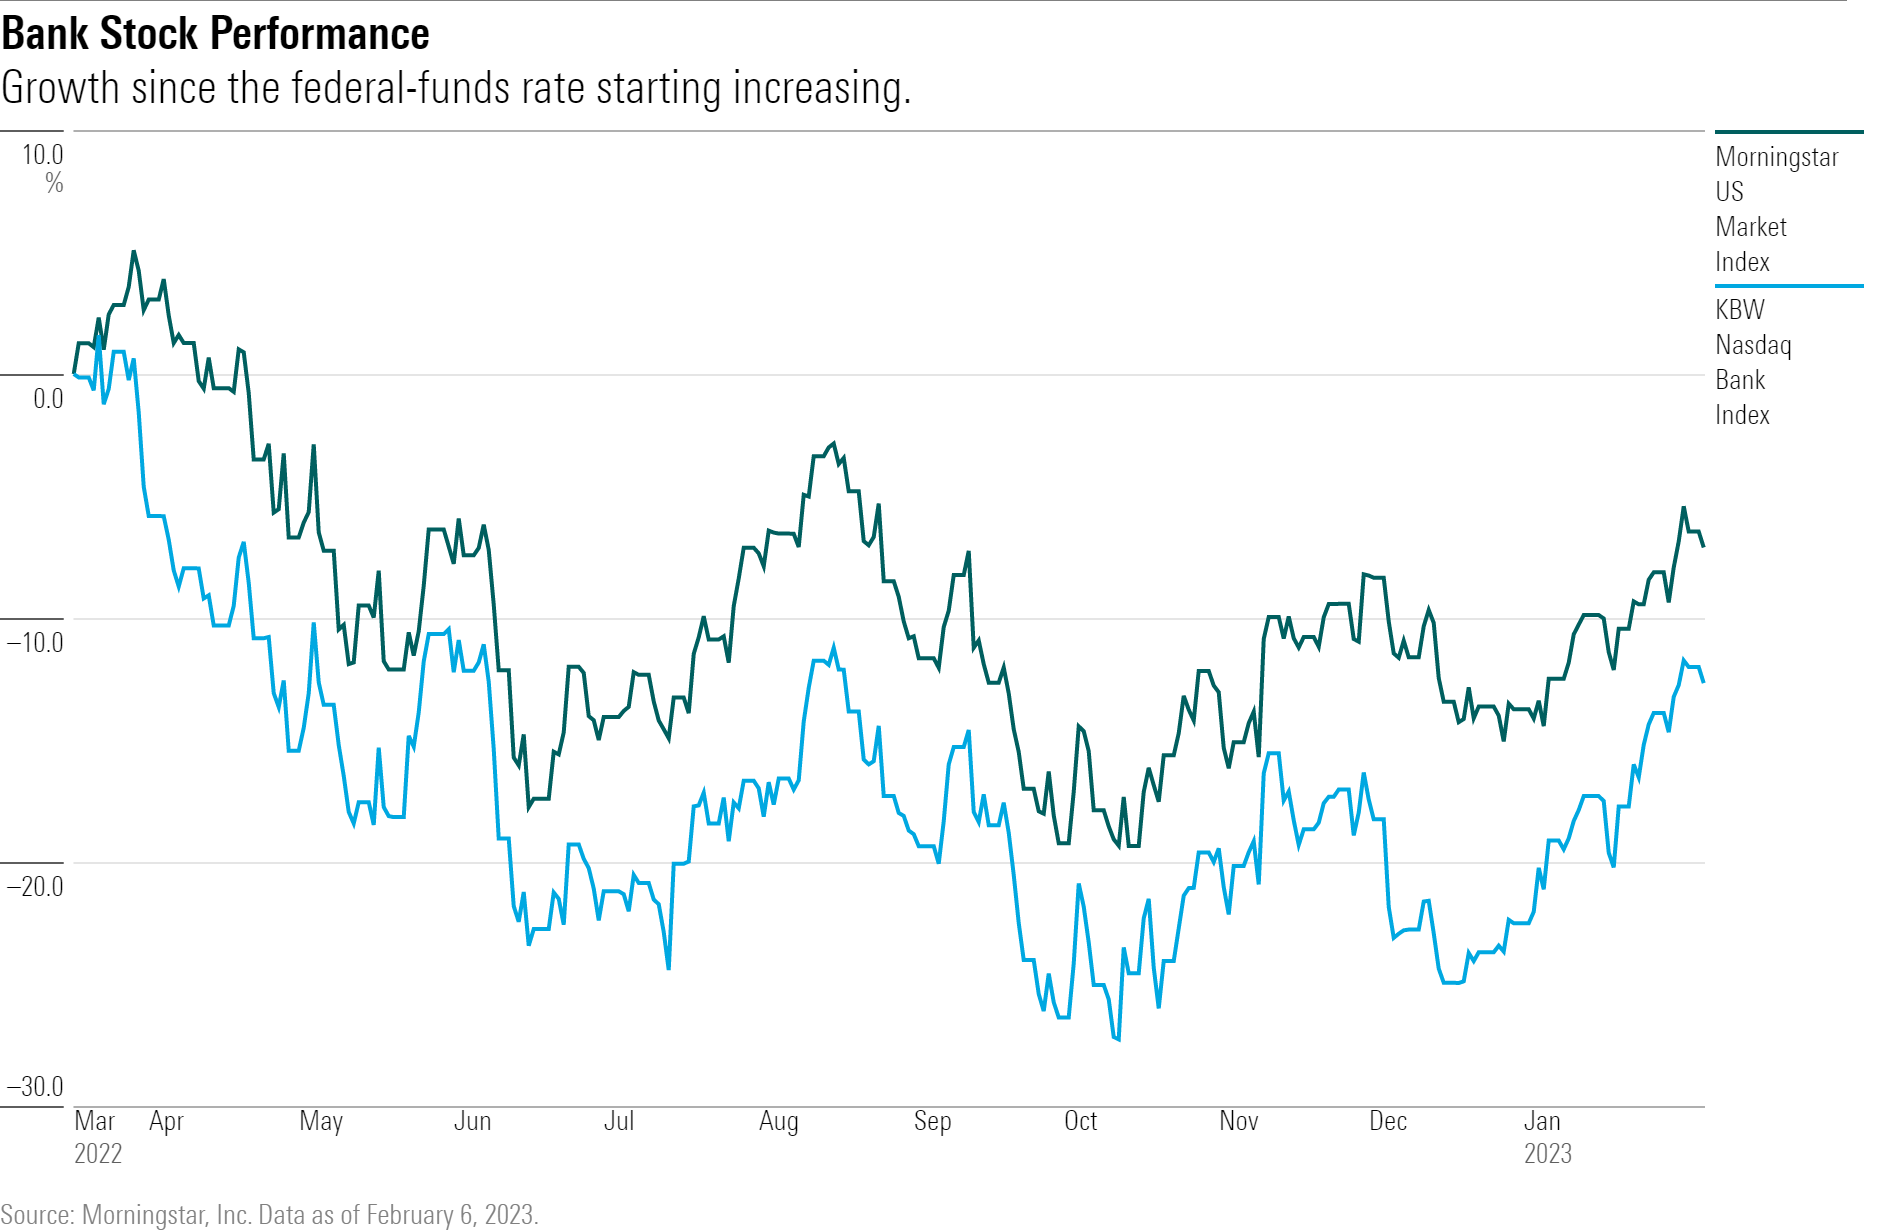 A line chart showing the performance of the Morningstar US Market Index and the KBW Nasdaq Bank Index.